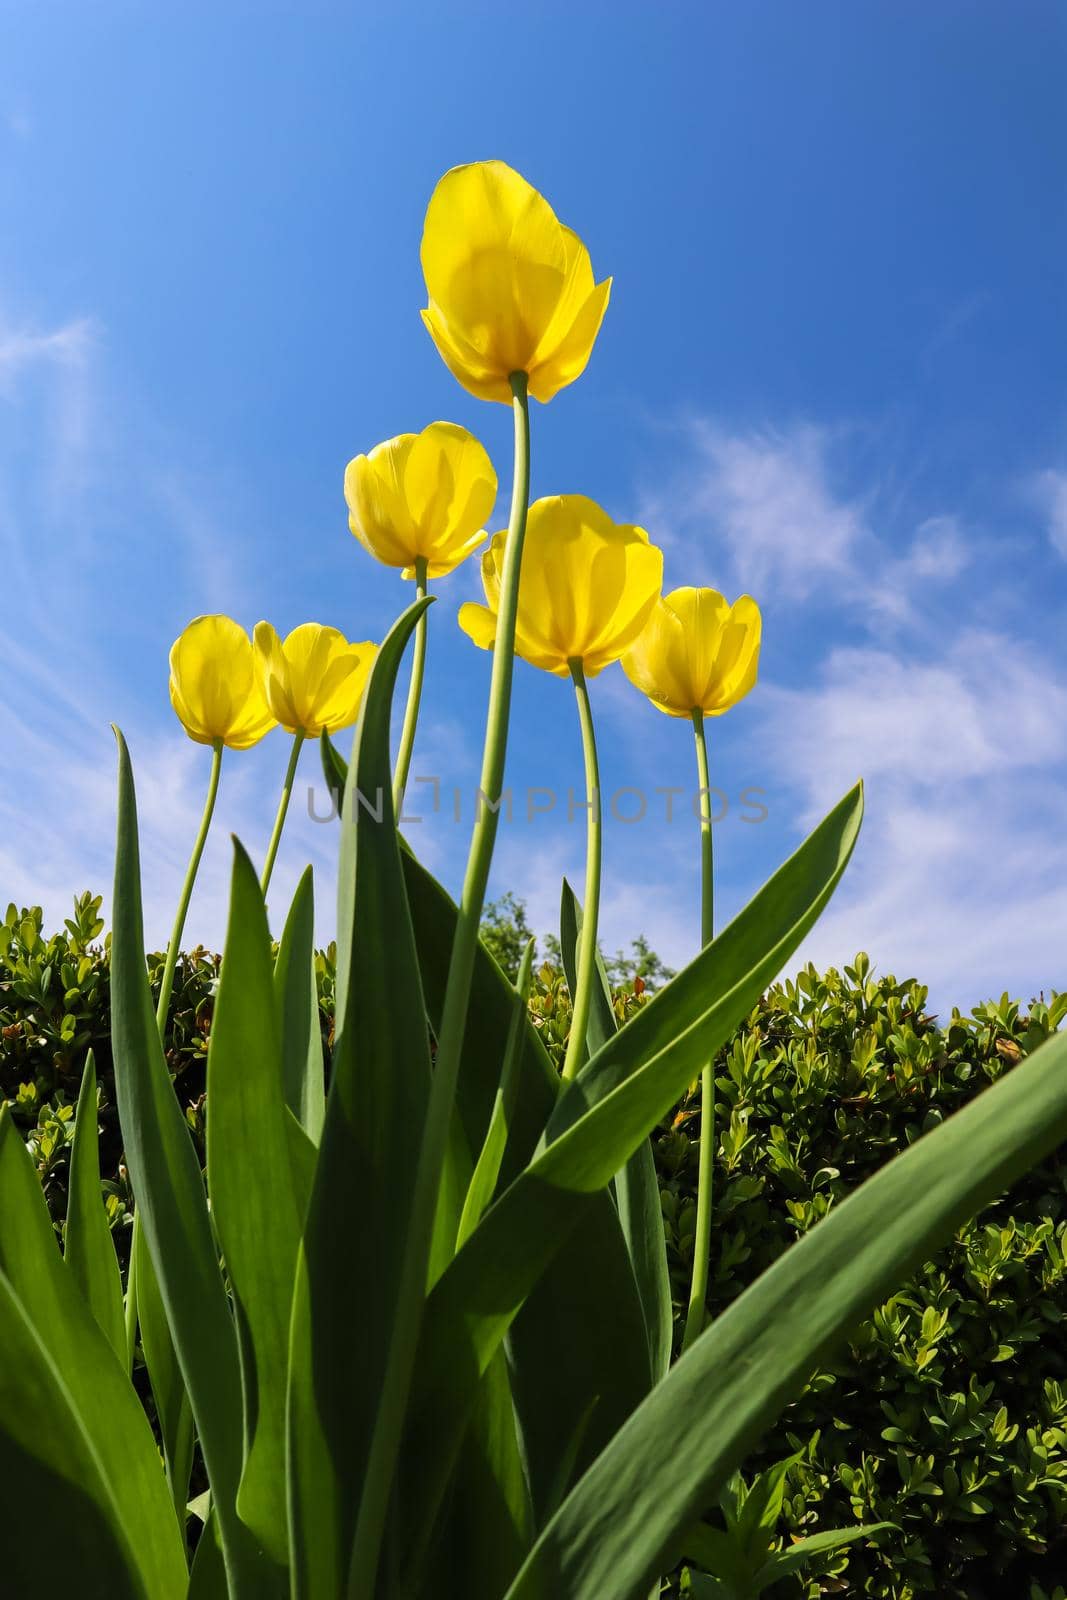 Beautiful yellow tulips in spring against blue sky with clouds. Floral background